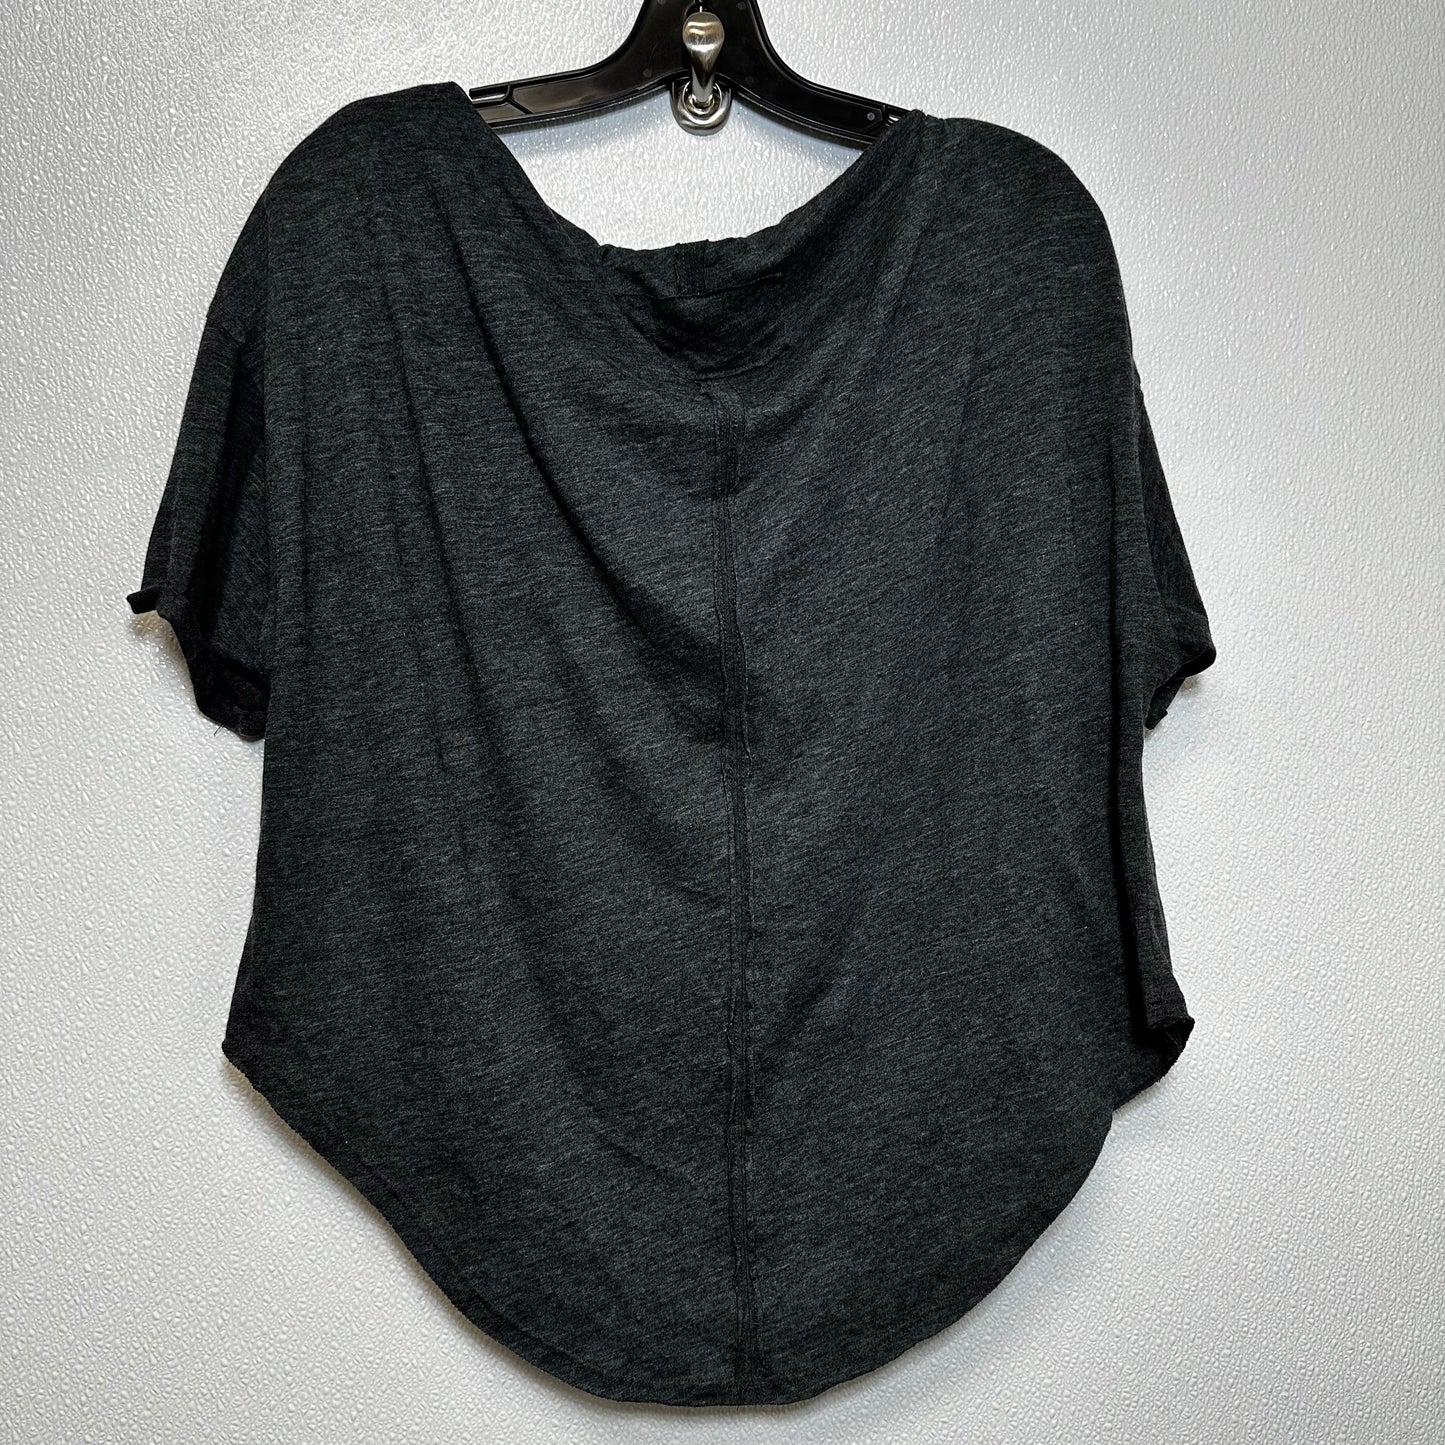 Charcoal Top Short Sleeve Basic We The Free, Size S